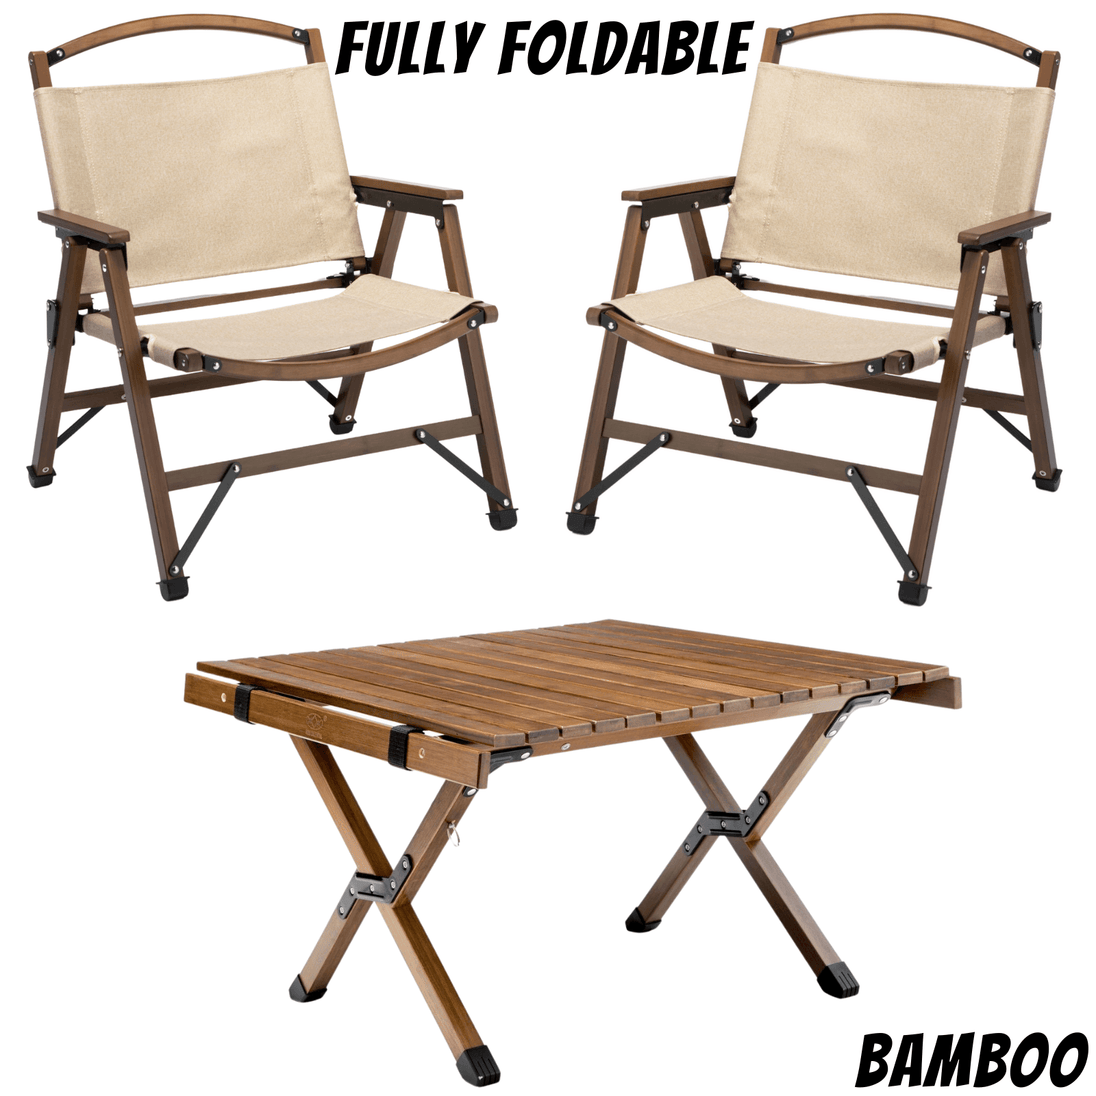 Buy Bamboo Foldable Camping Table + 2 Chairs Waterproof Wood Wooden Travel Set Kit discounted | Products On Sale Australia